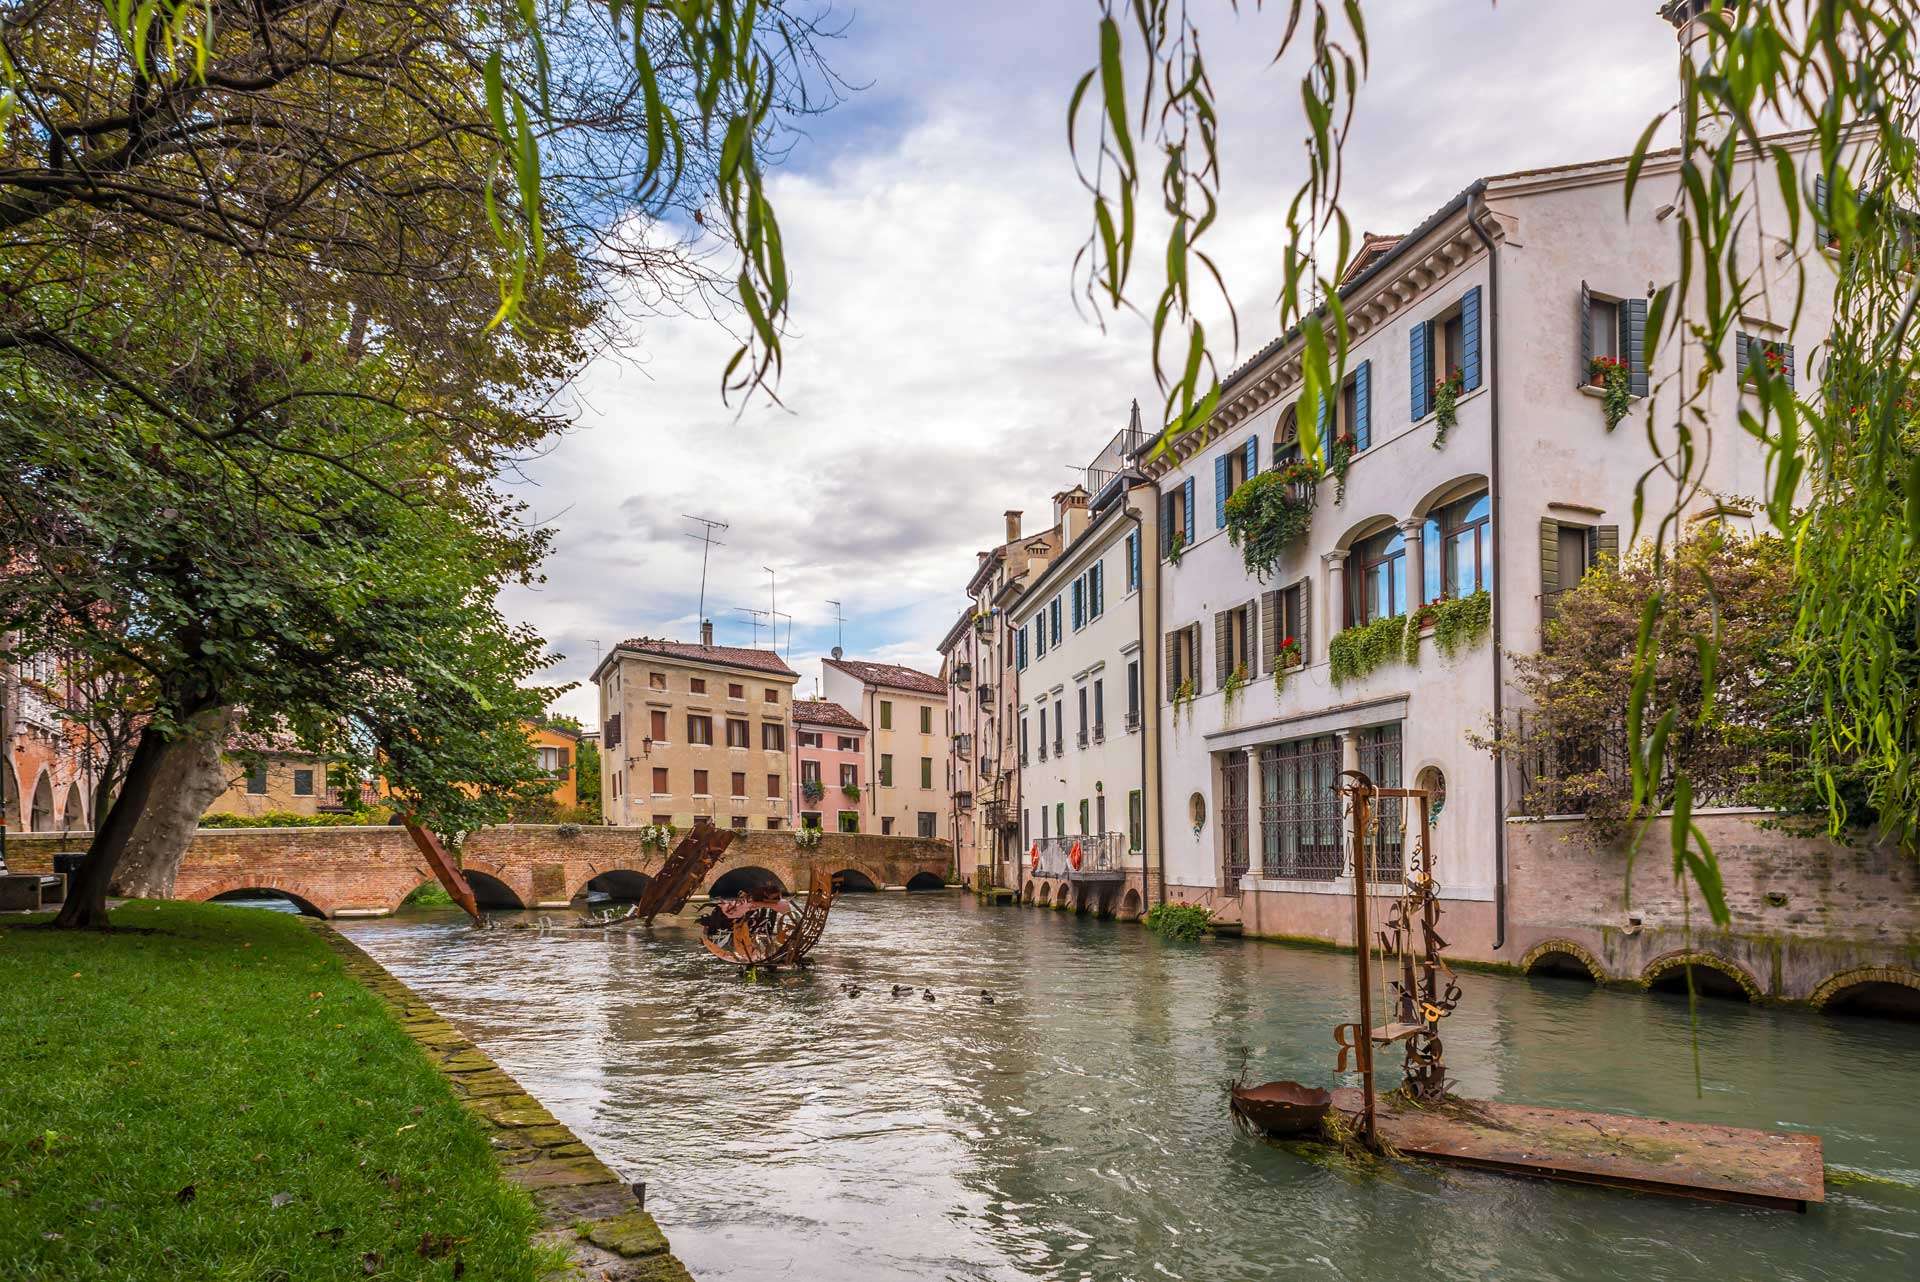 A Guide to Treviso